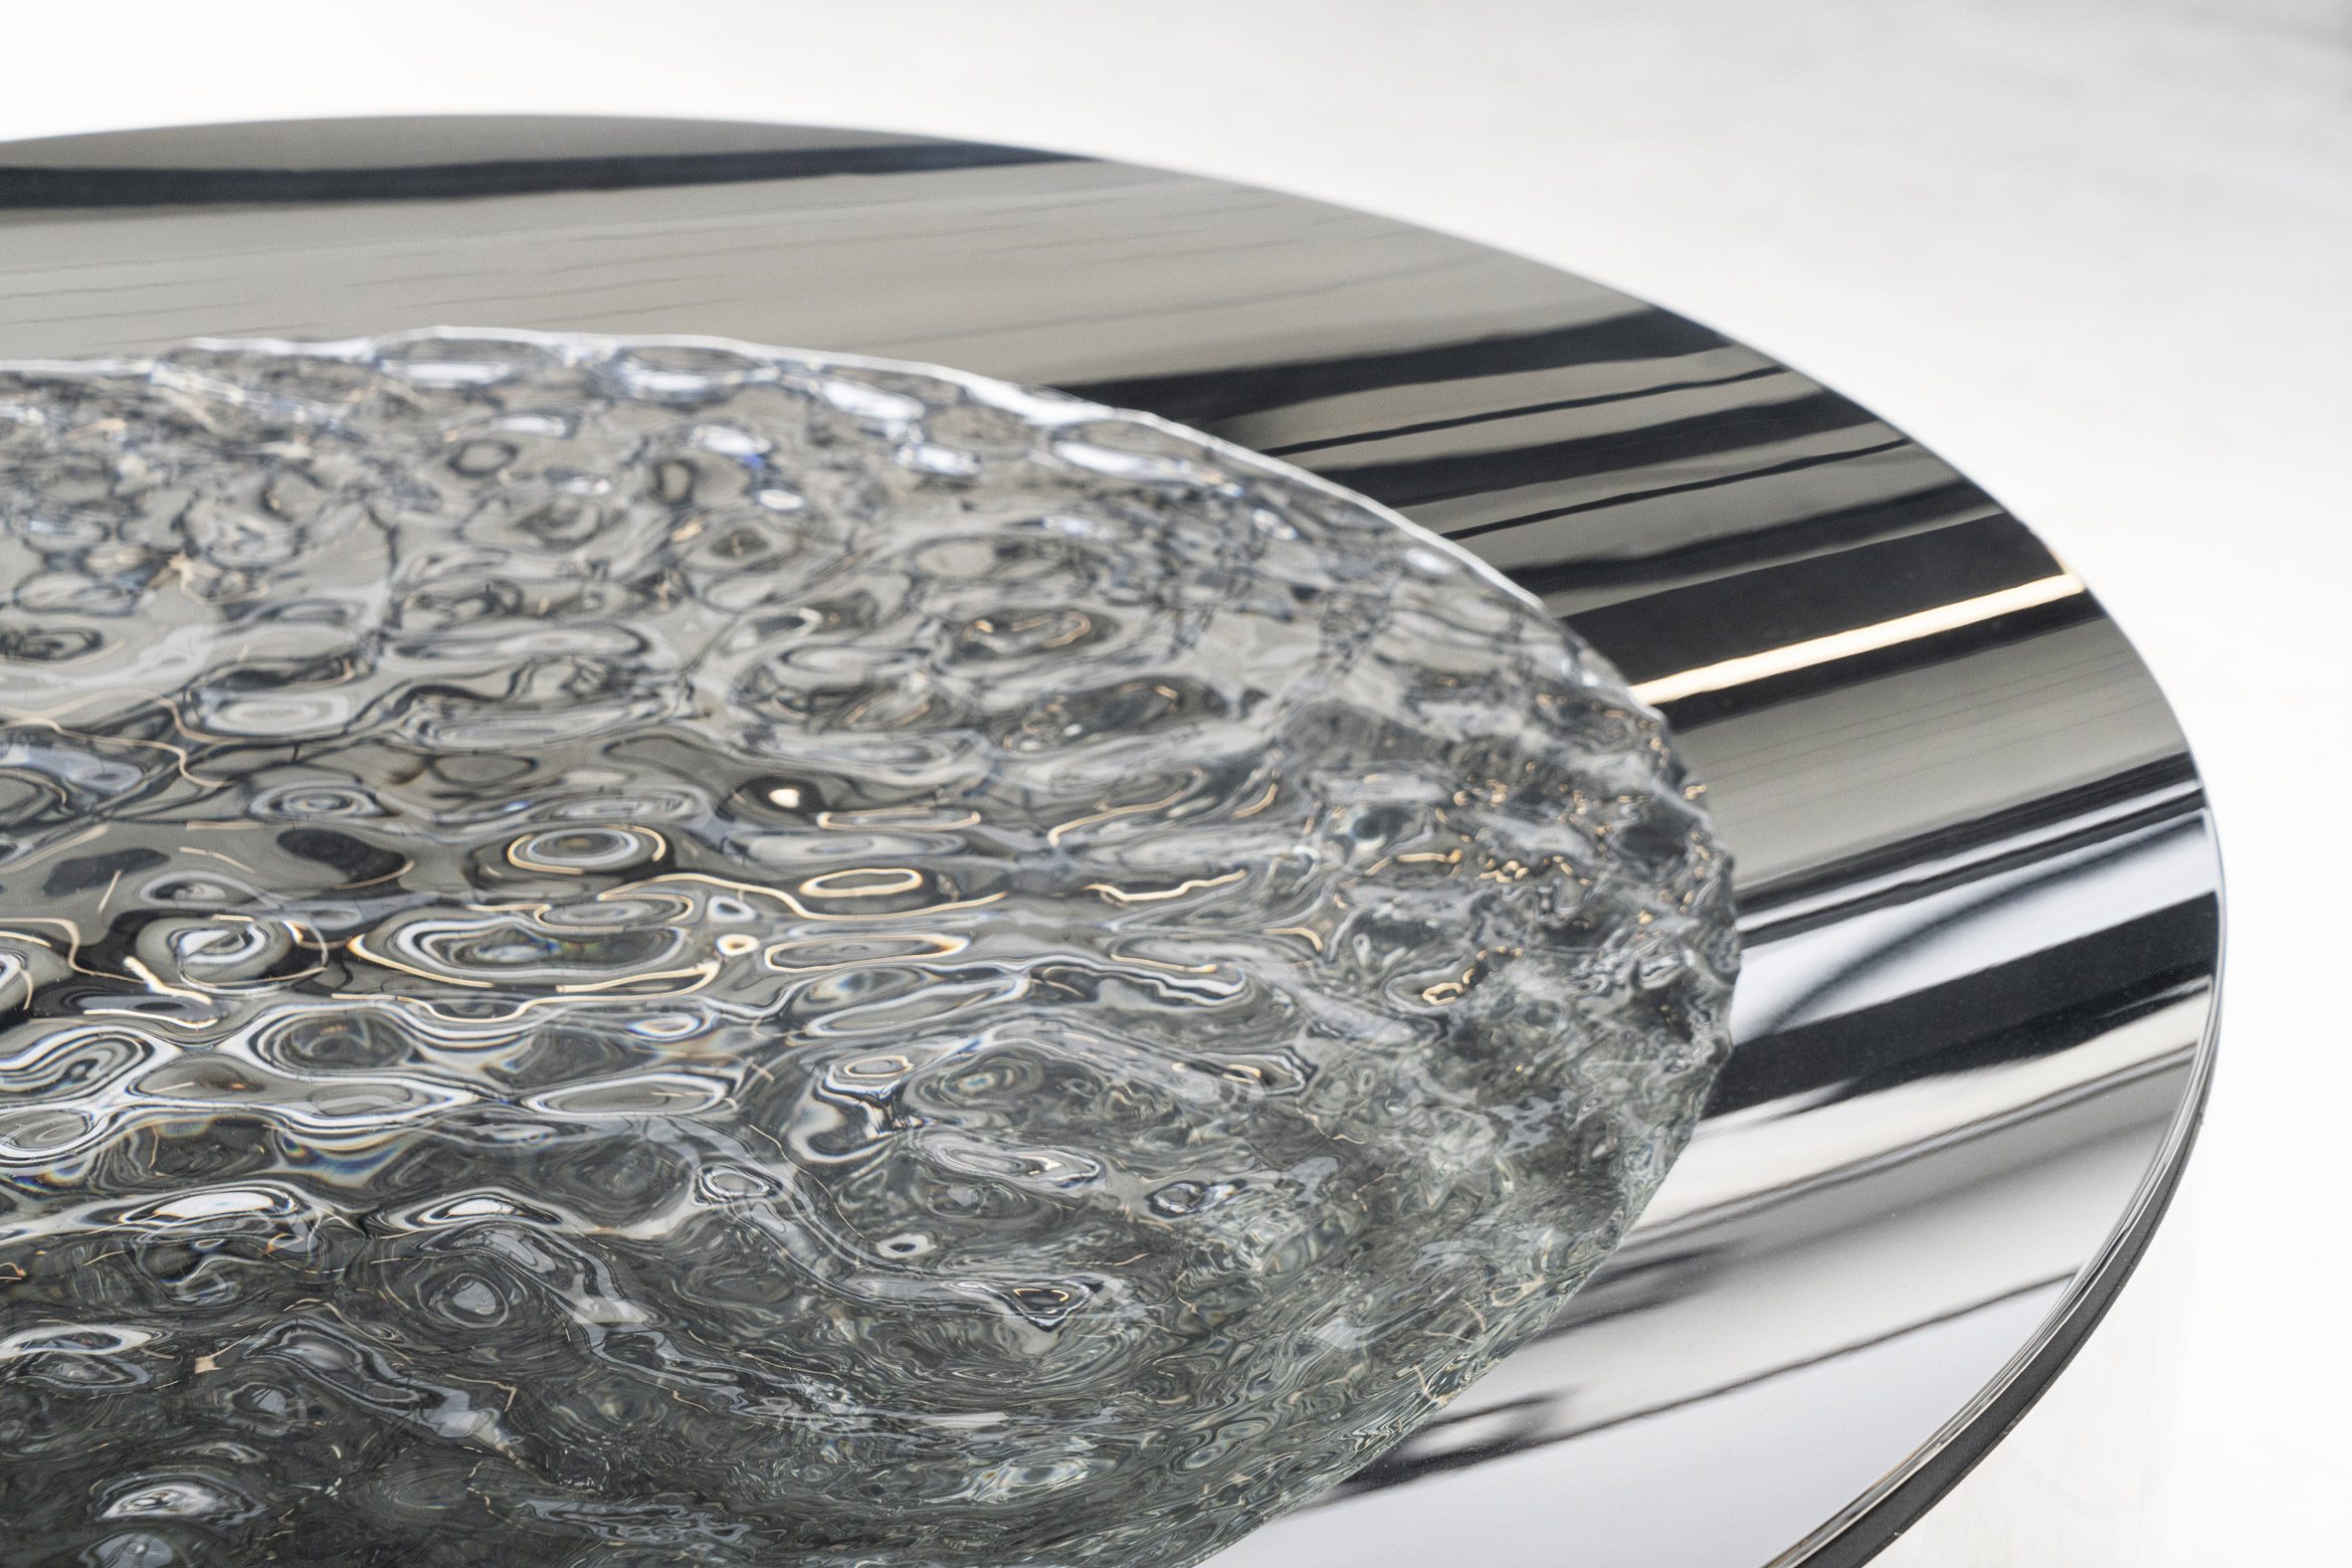 Ripping water in a stainless steel basin by Lachlan Turczan